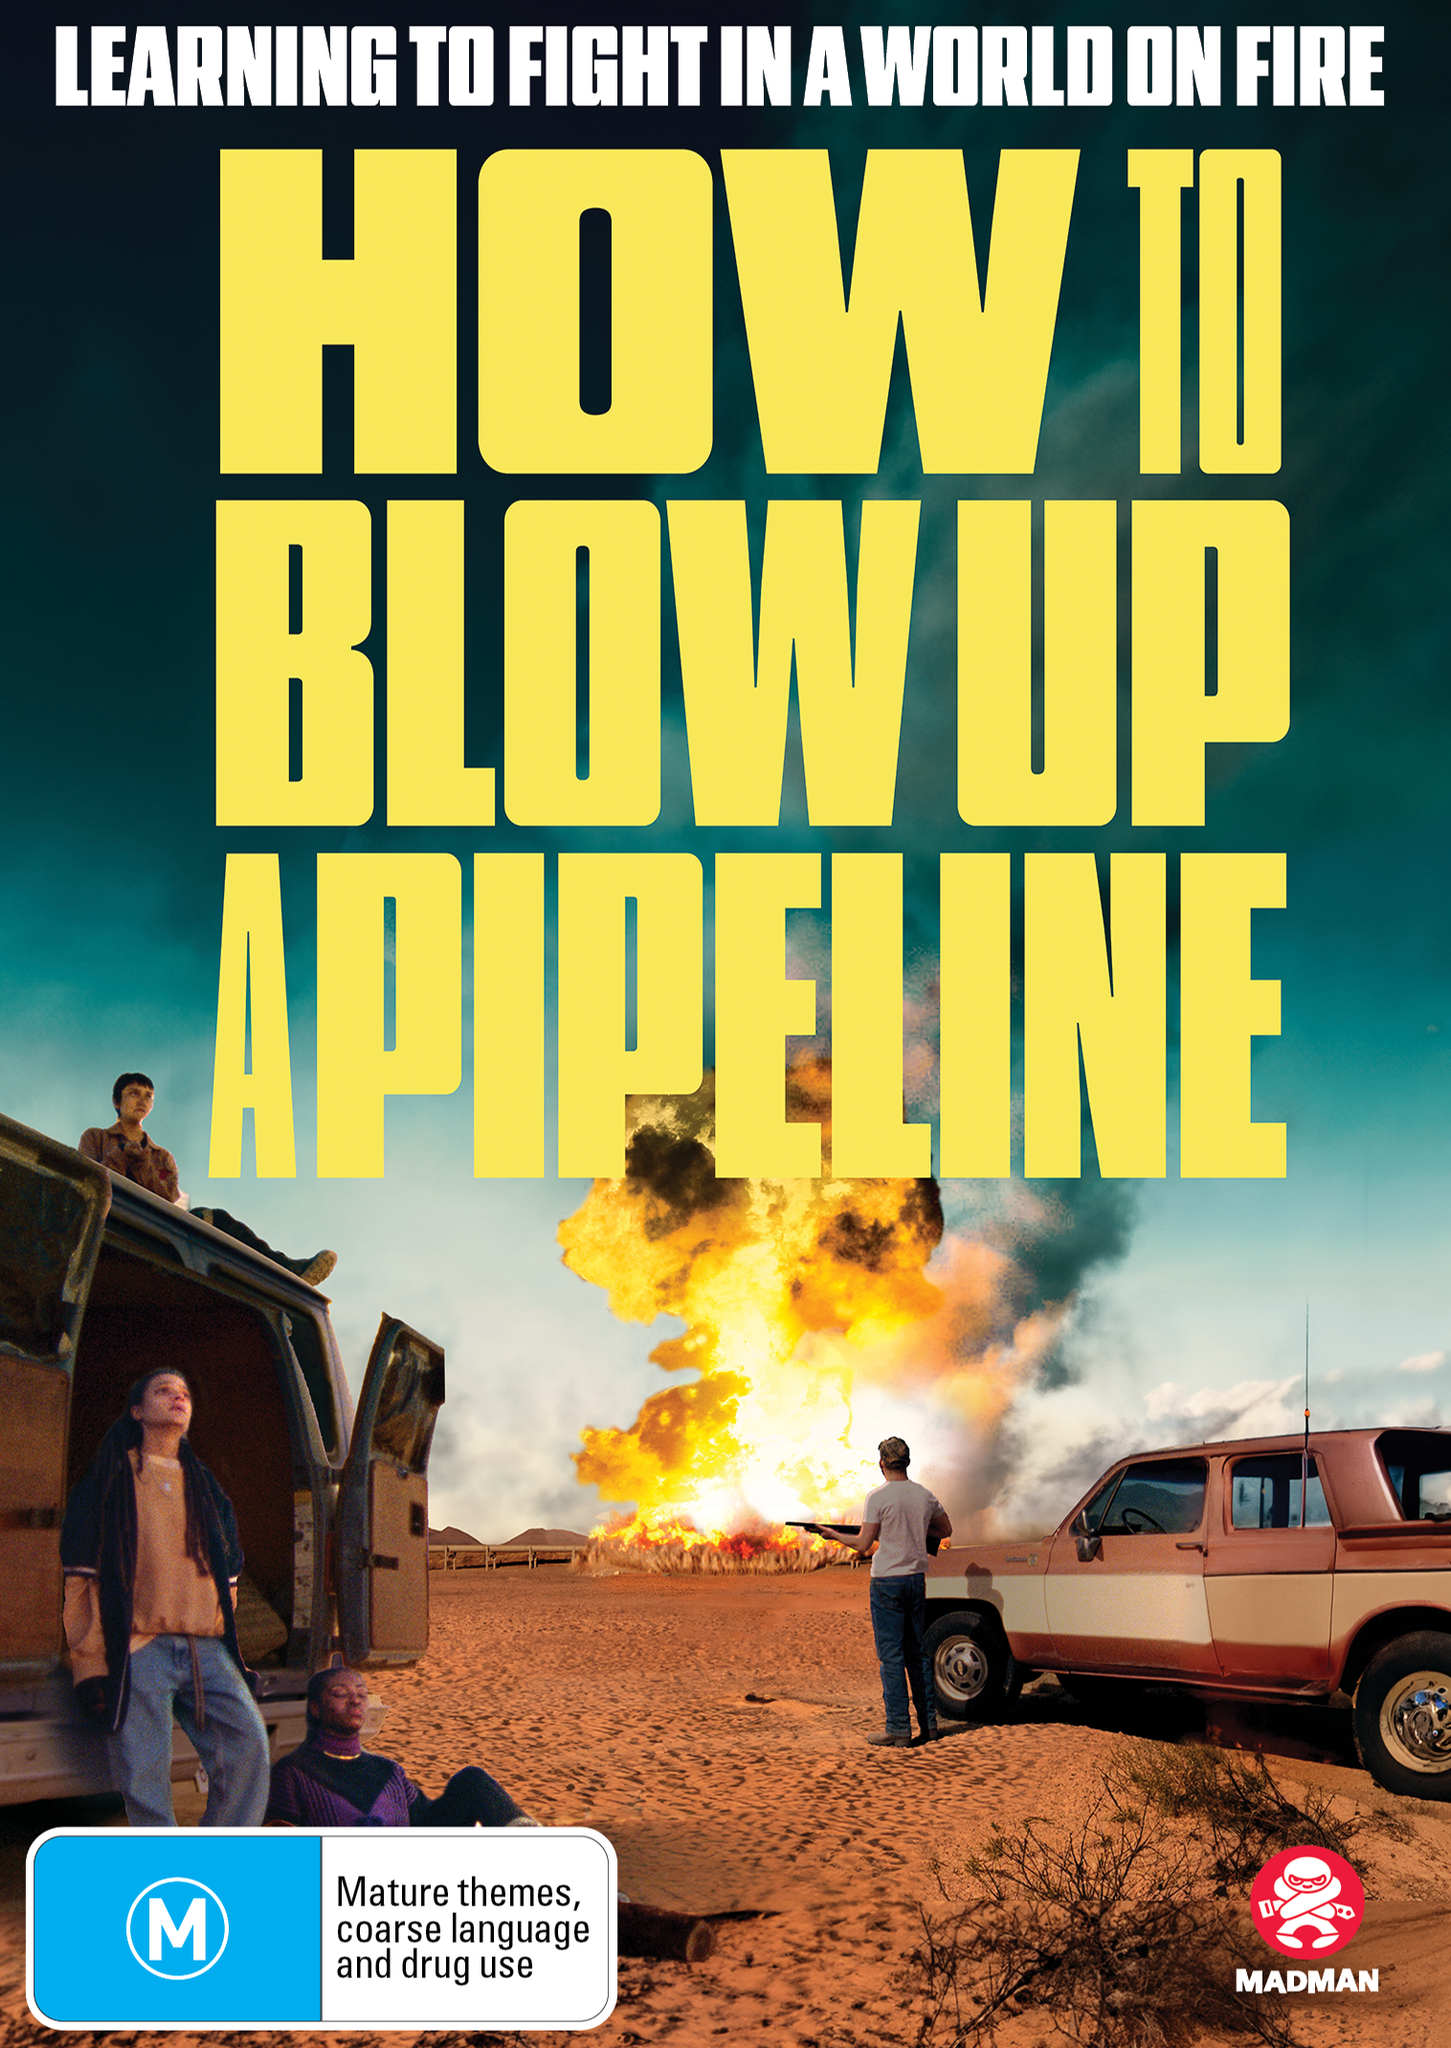 HOW TO BLOW UP A PIPELINE